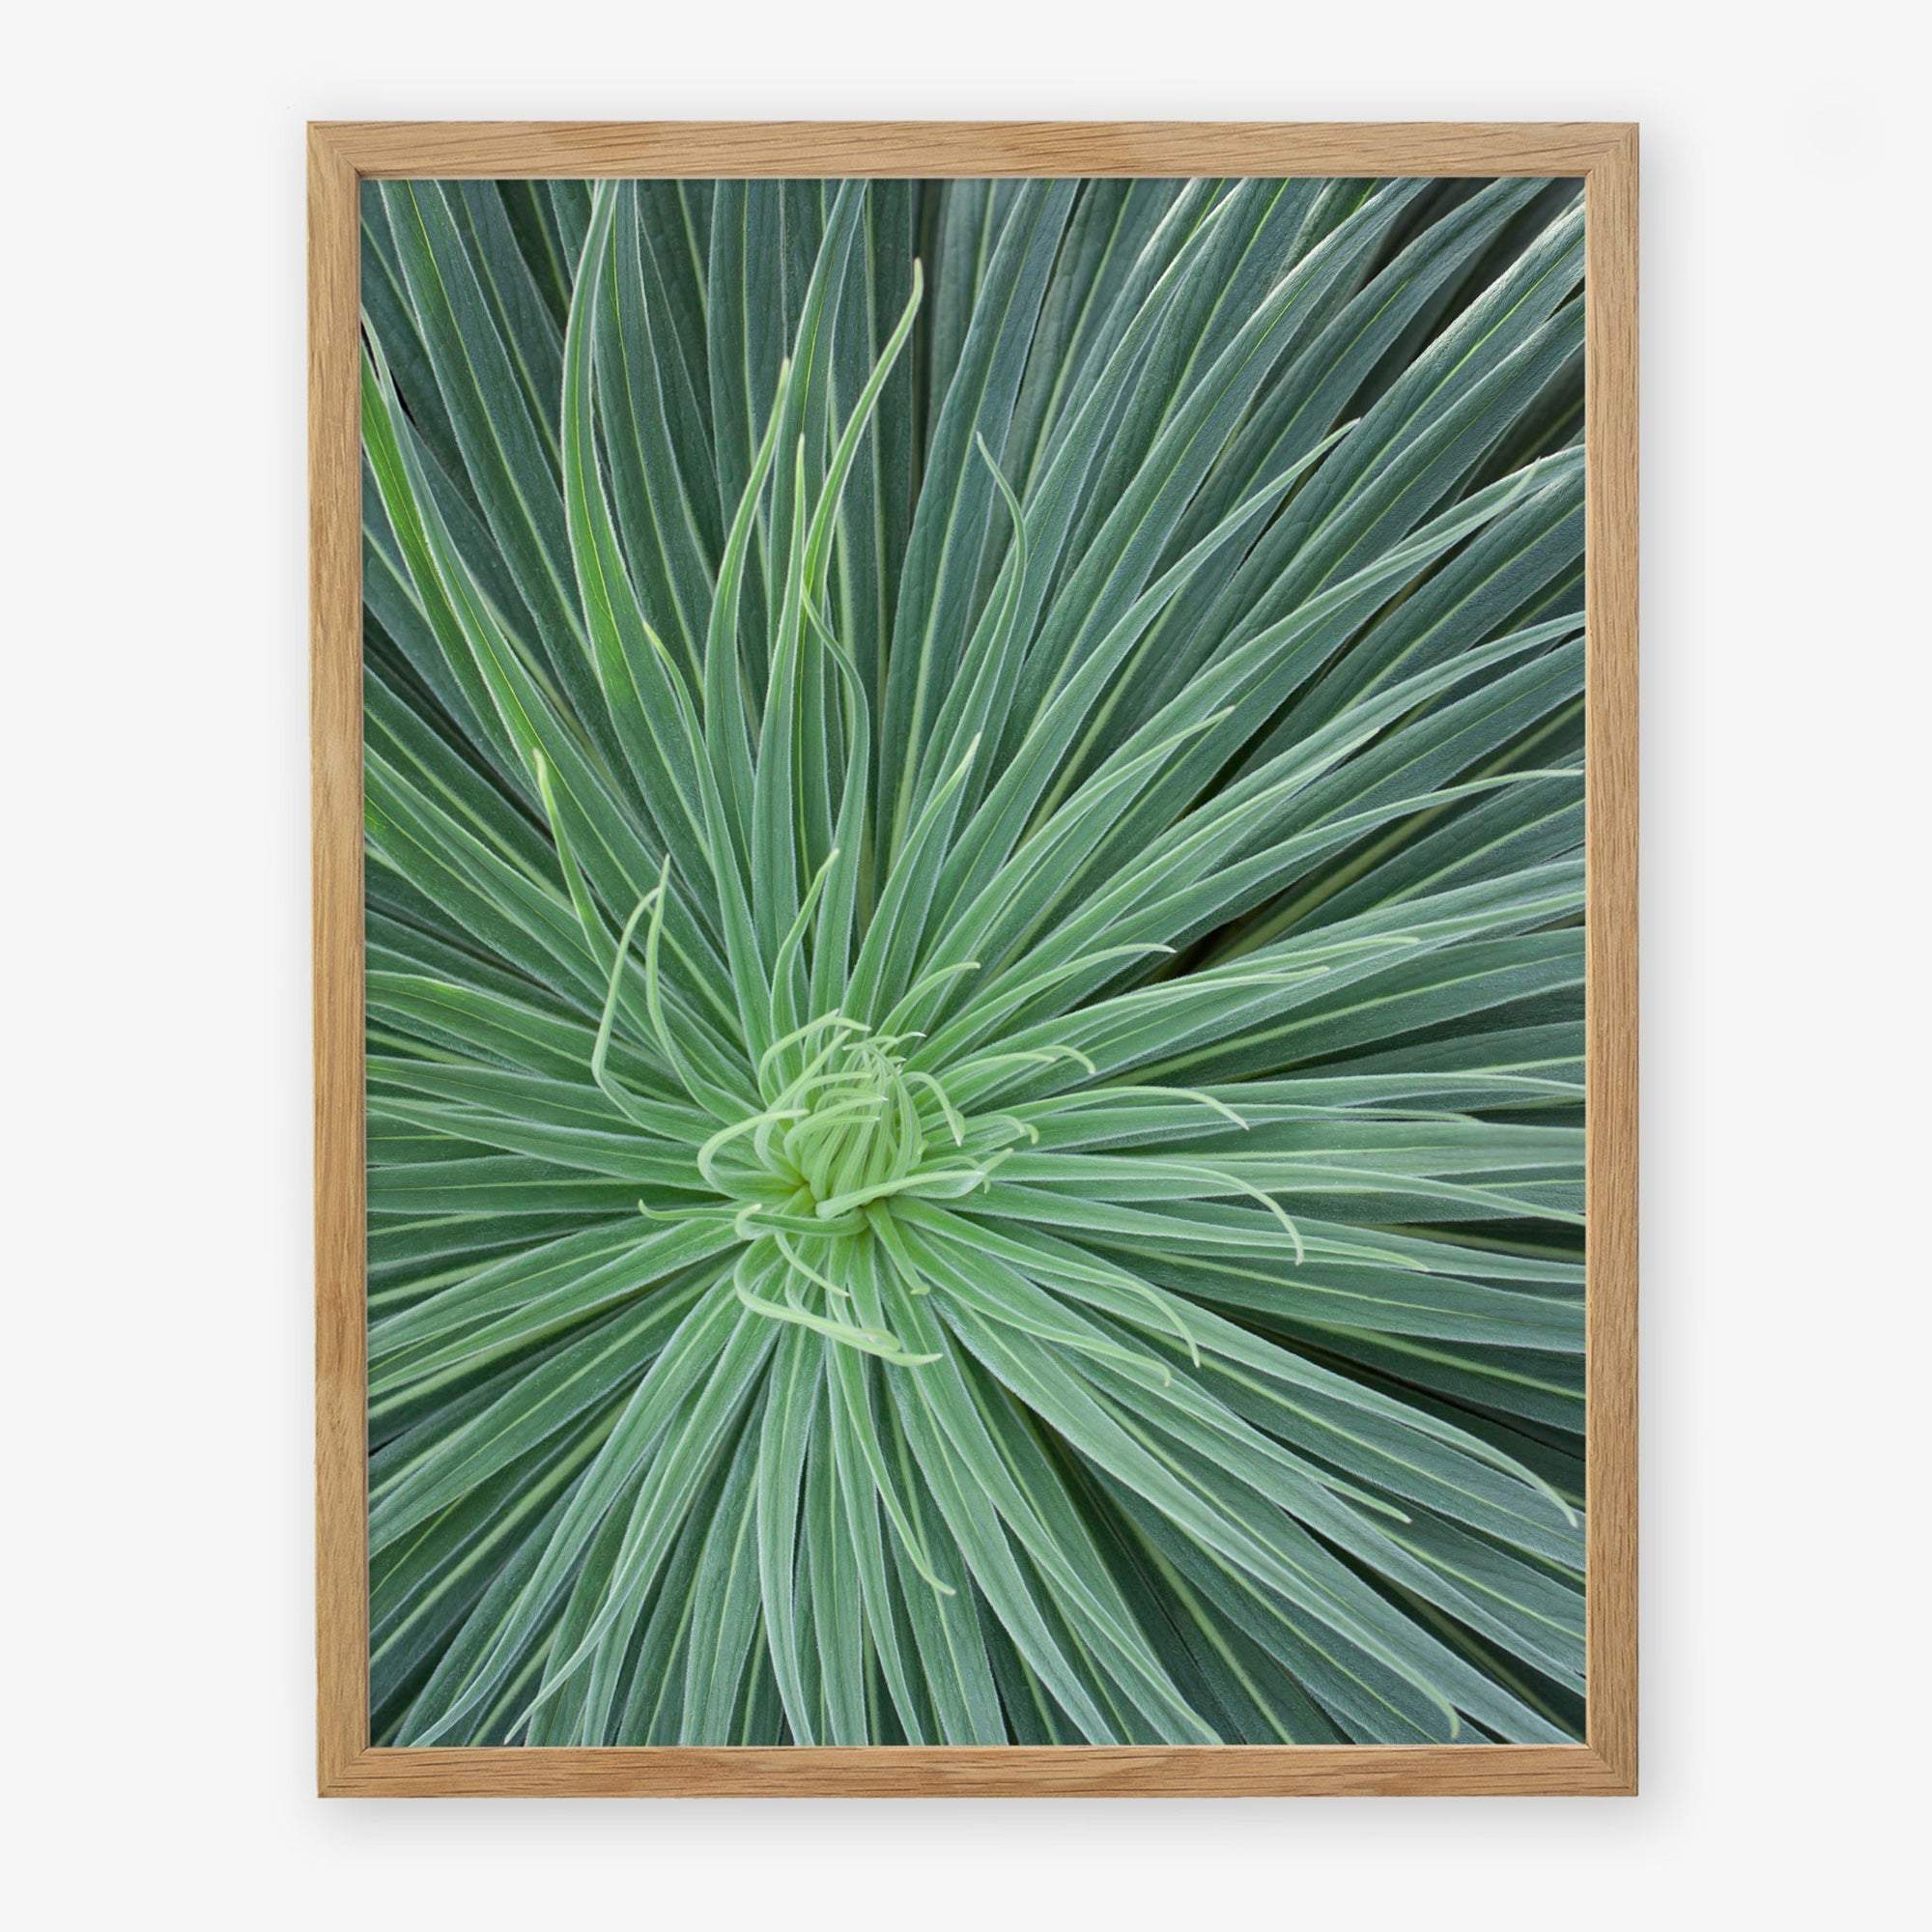 A framed photograph of a close-up view of a Green Botanical Wall Art &#39;Desert Fireworks II&#39; yucca plant, highlighting its radial arrangement of sharp, elongated leaves, printed on archival photographic paper by Offley Green.